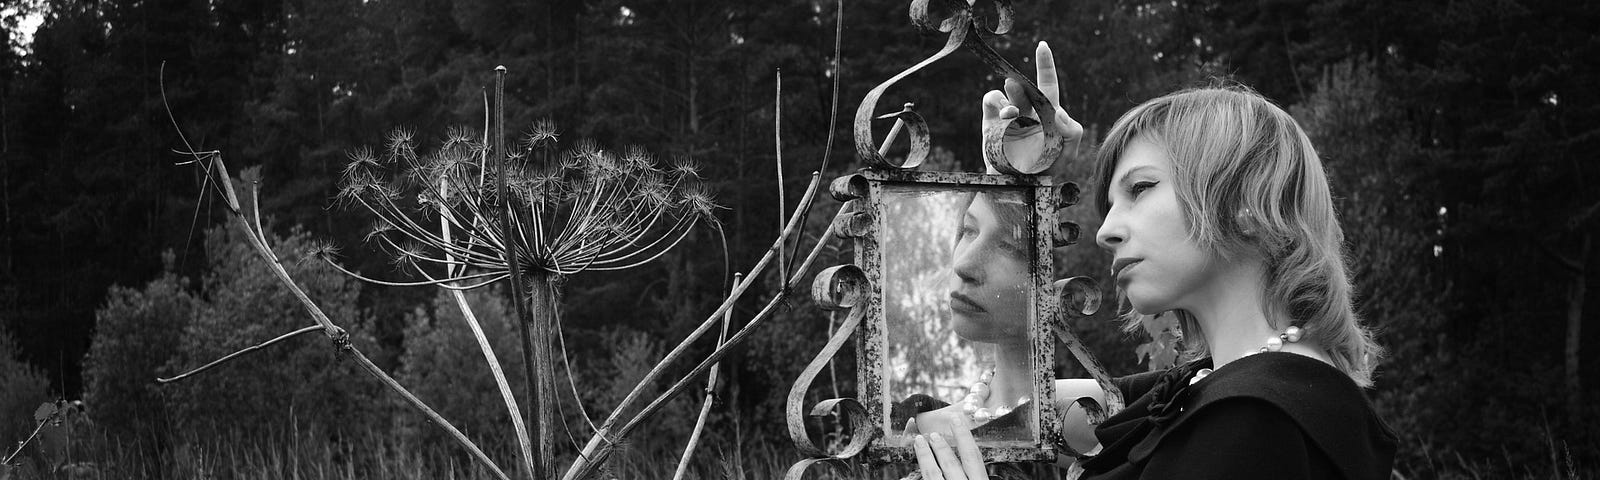 Black and white picture of a women looking into a mirror in the middle of a field